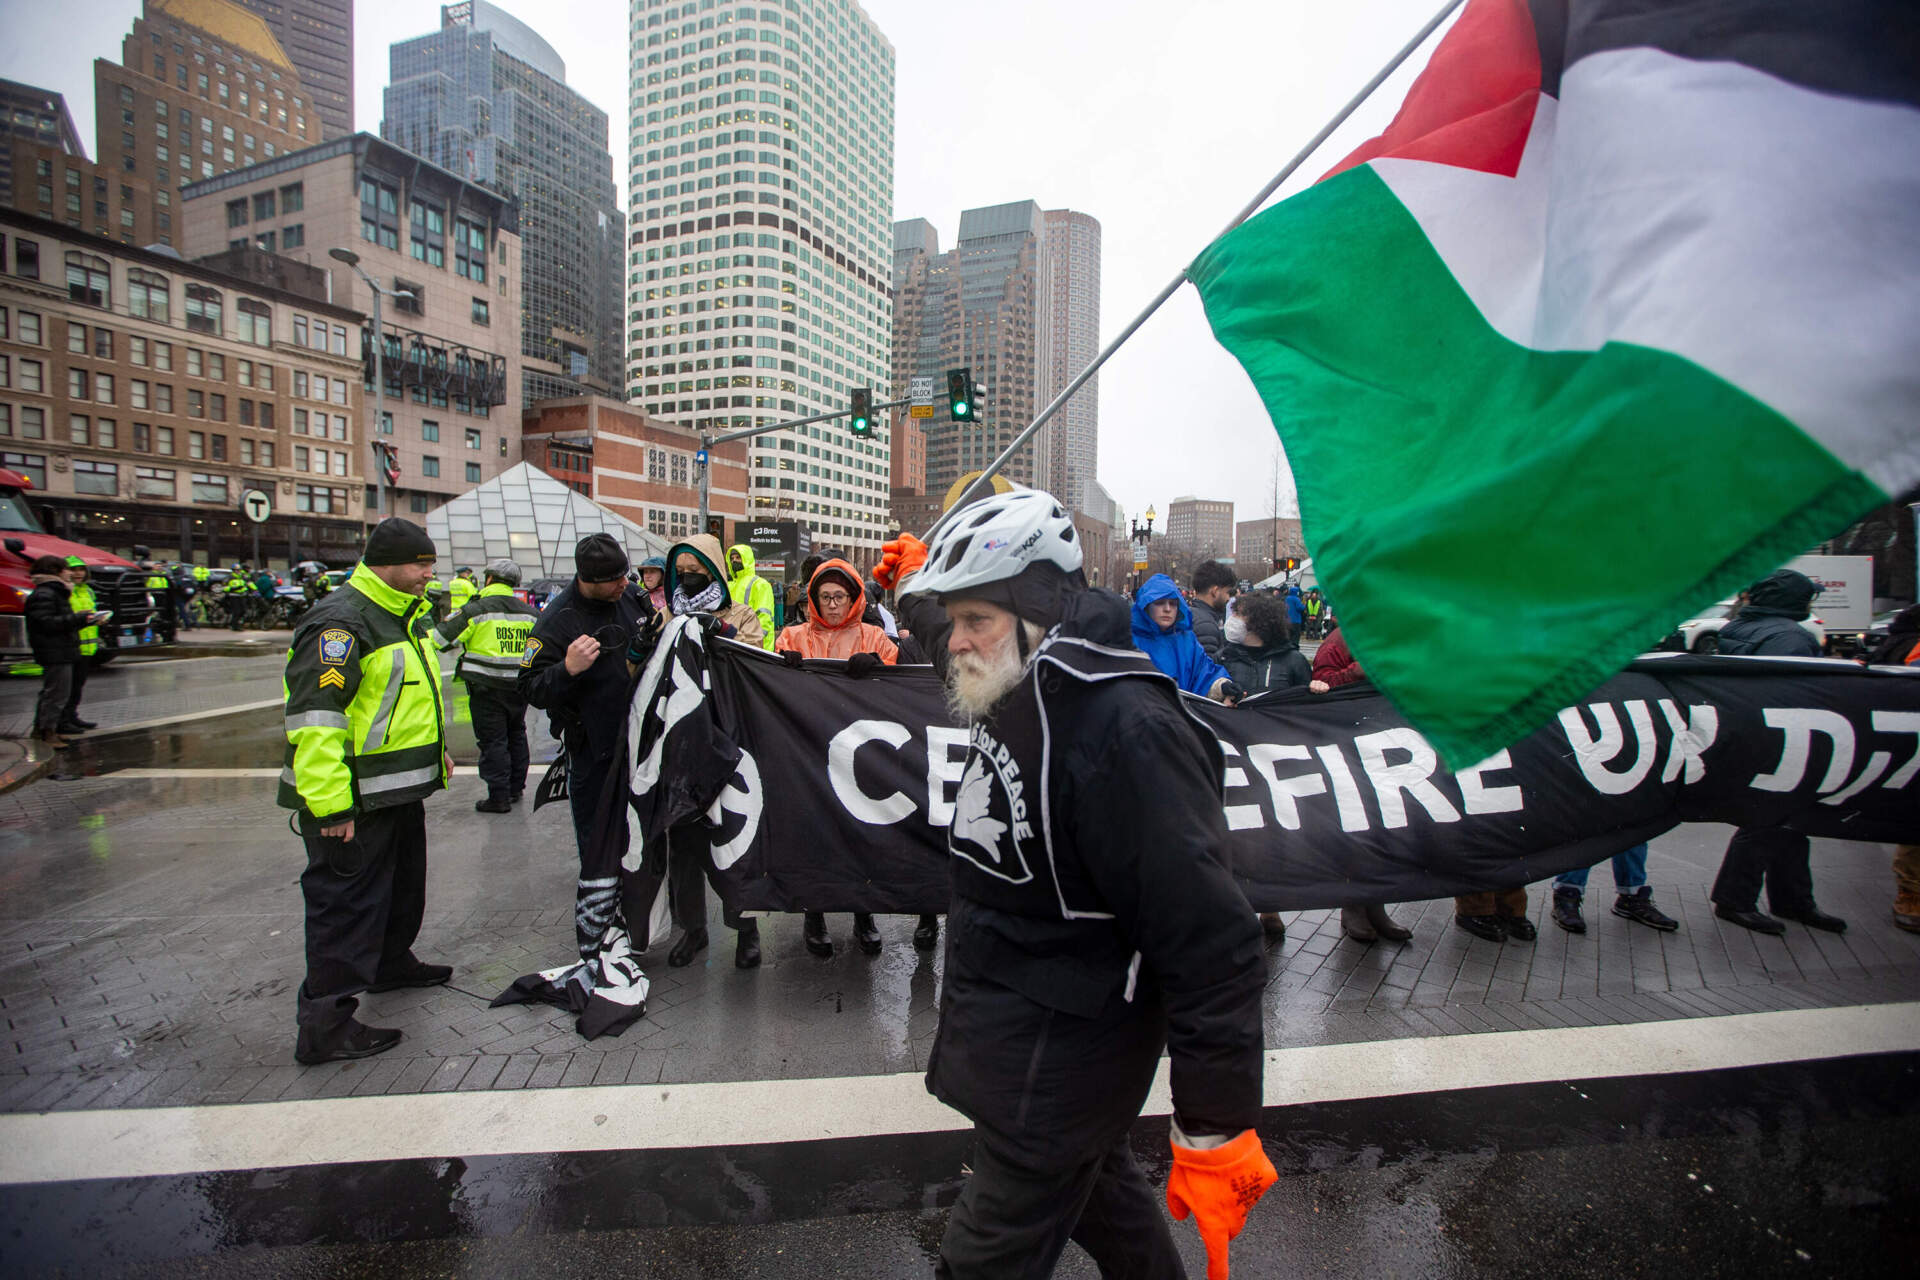 A protester walks through the scene carrying a Palestinian flag as police arrest fellow demonstrators. (Jesse Costa/WBUR)